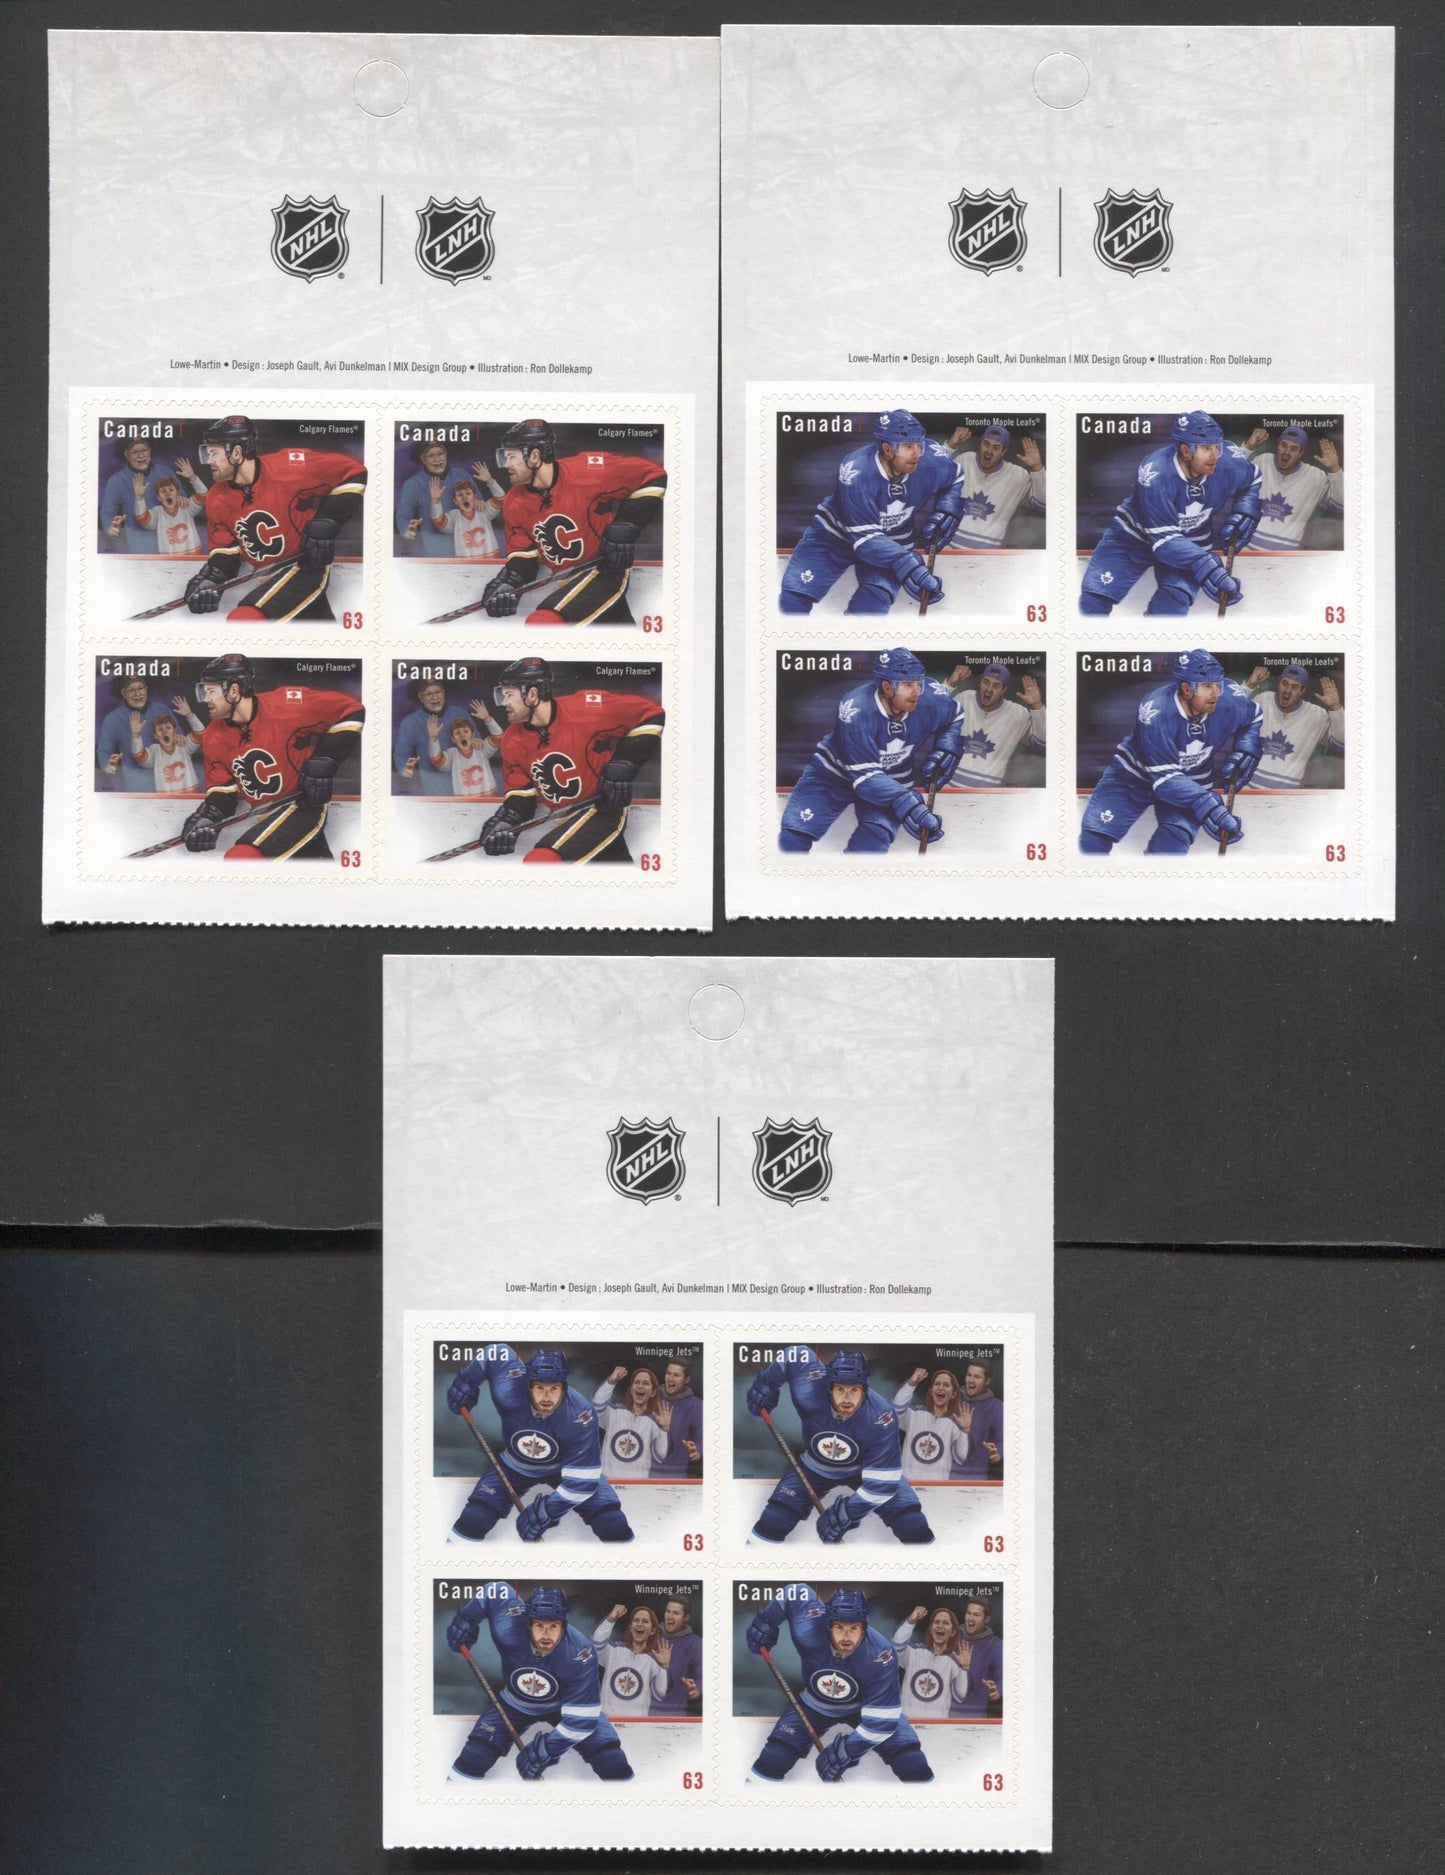 Lot 10 Canada #2674-2676 63c Multicolored Calgary Flames-Toronto Maple Leafs, 2013 Canadian NHL Jersey's Issue, 3 VFNH Booklet Panes Of 4